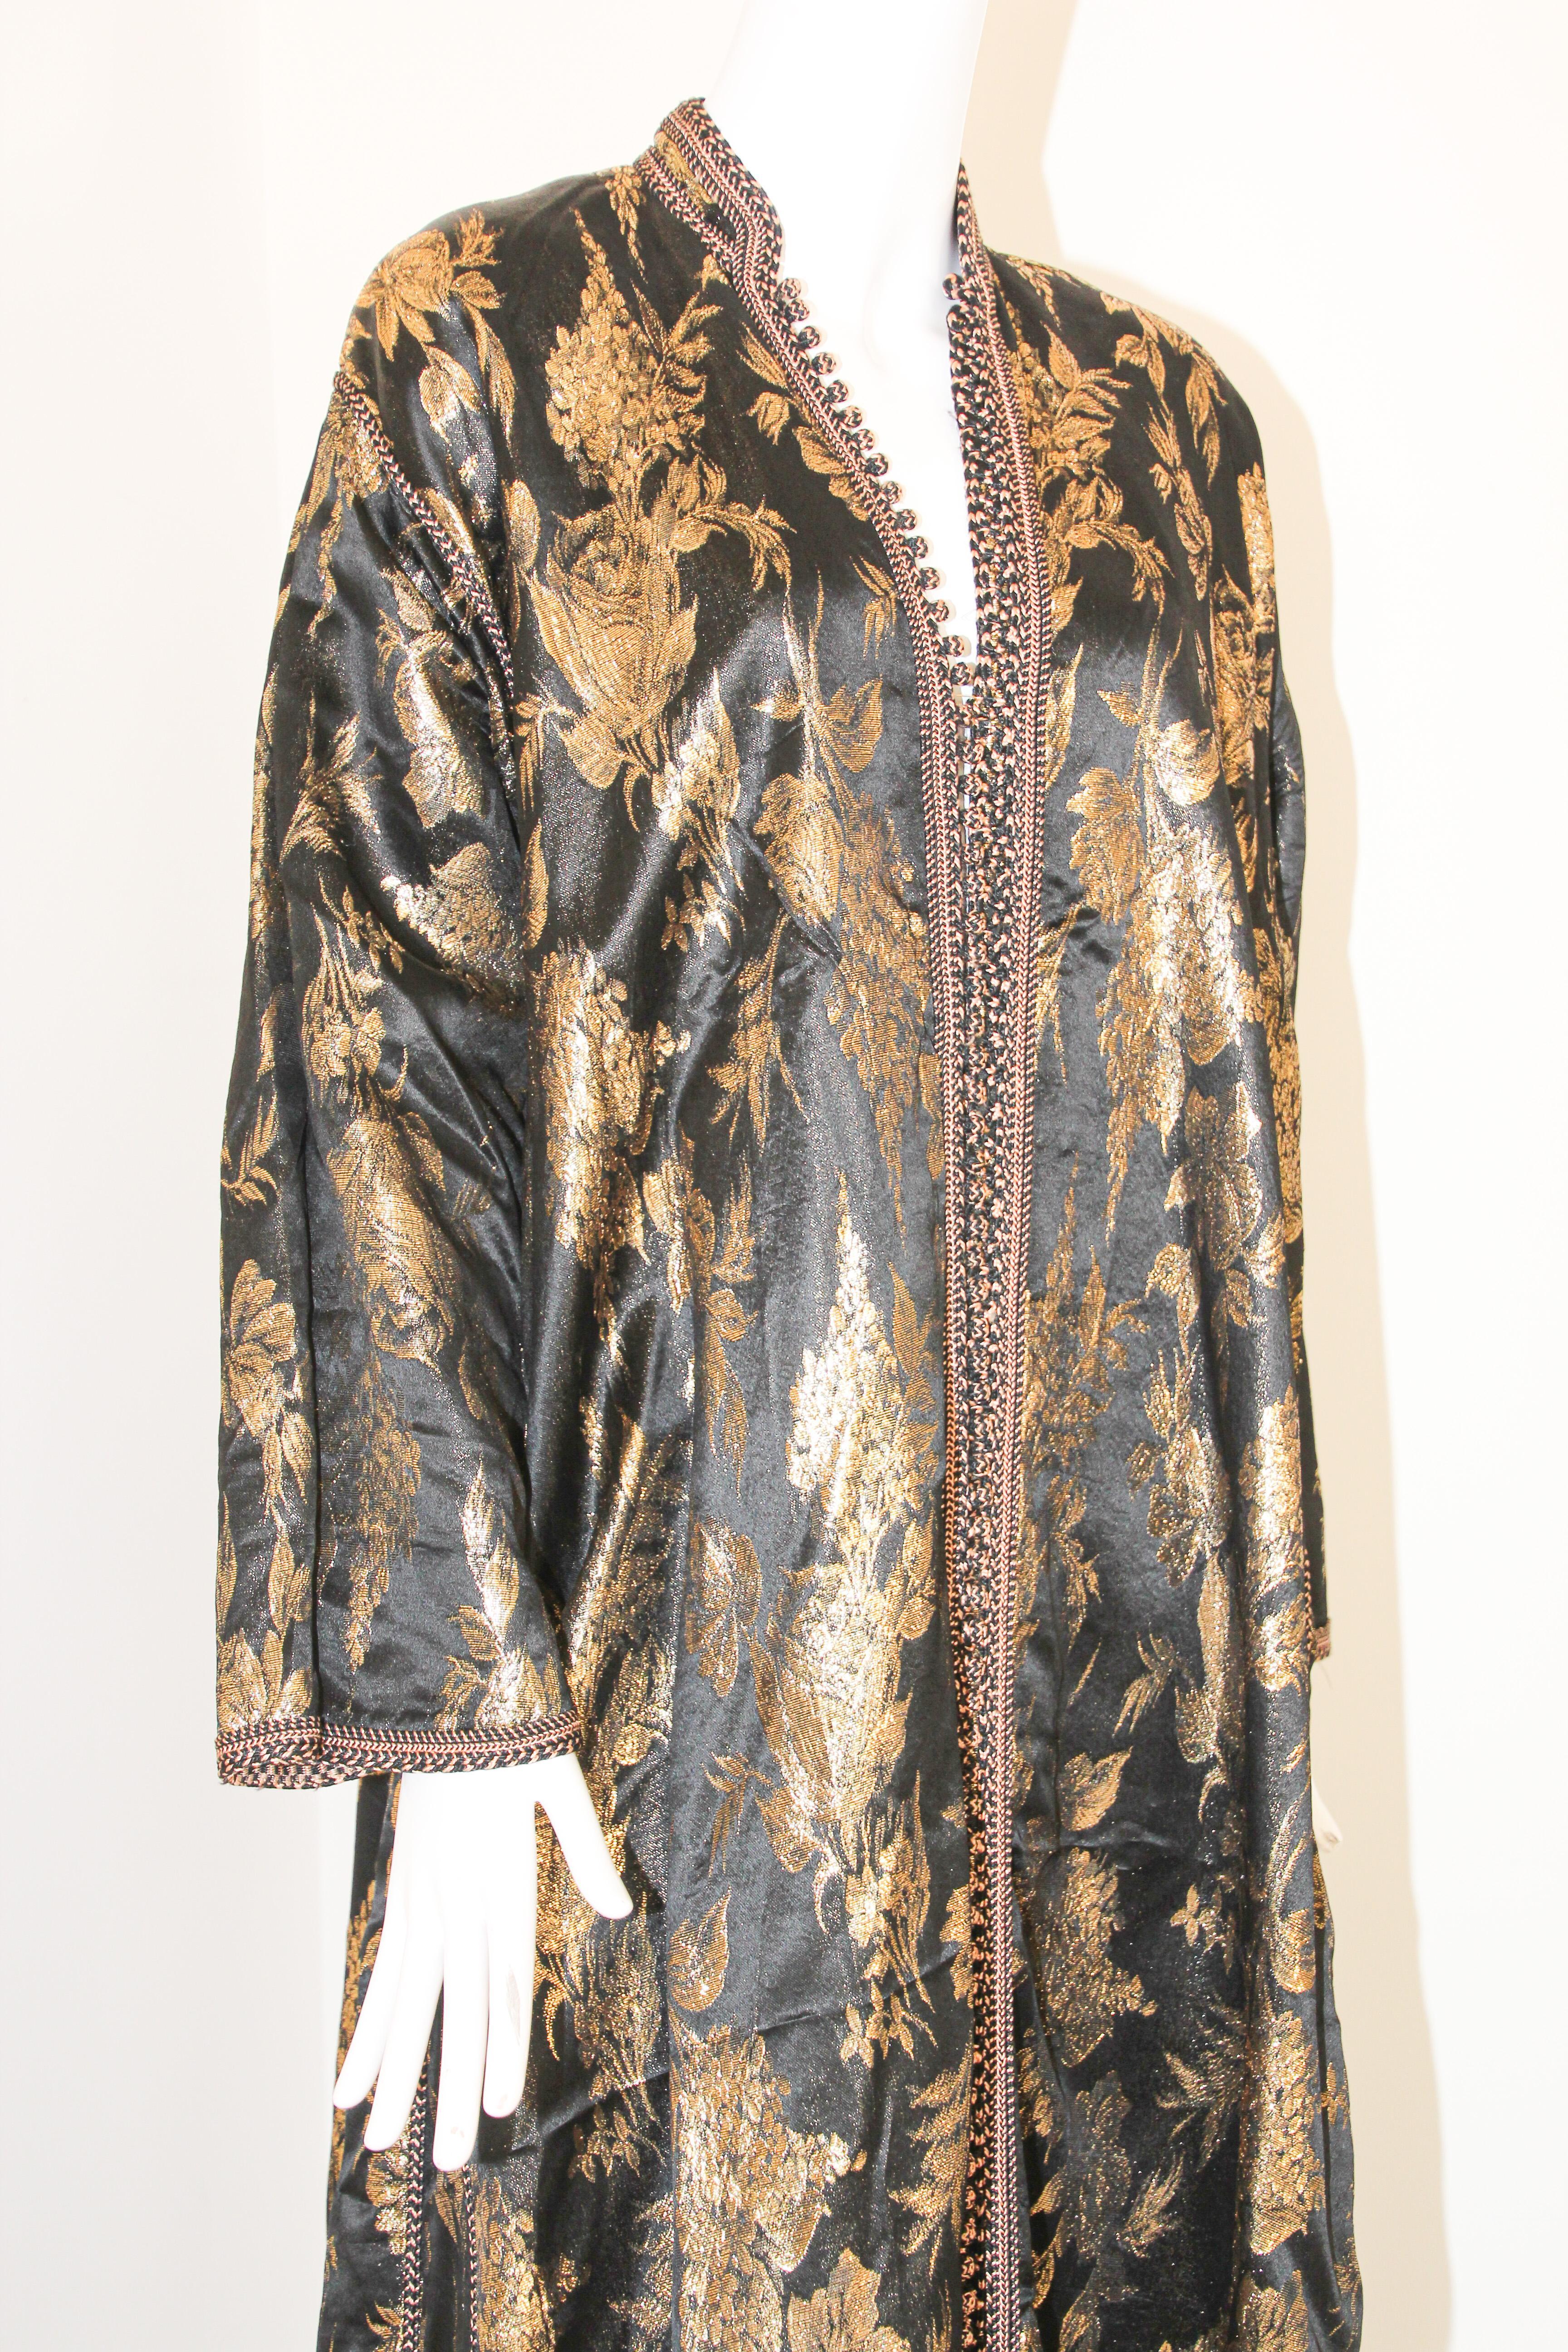 Vintage Moroccan Caftan, Black and Gold Embroidered, ca. 1960s For Sale 6